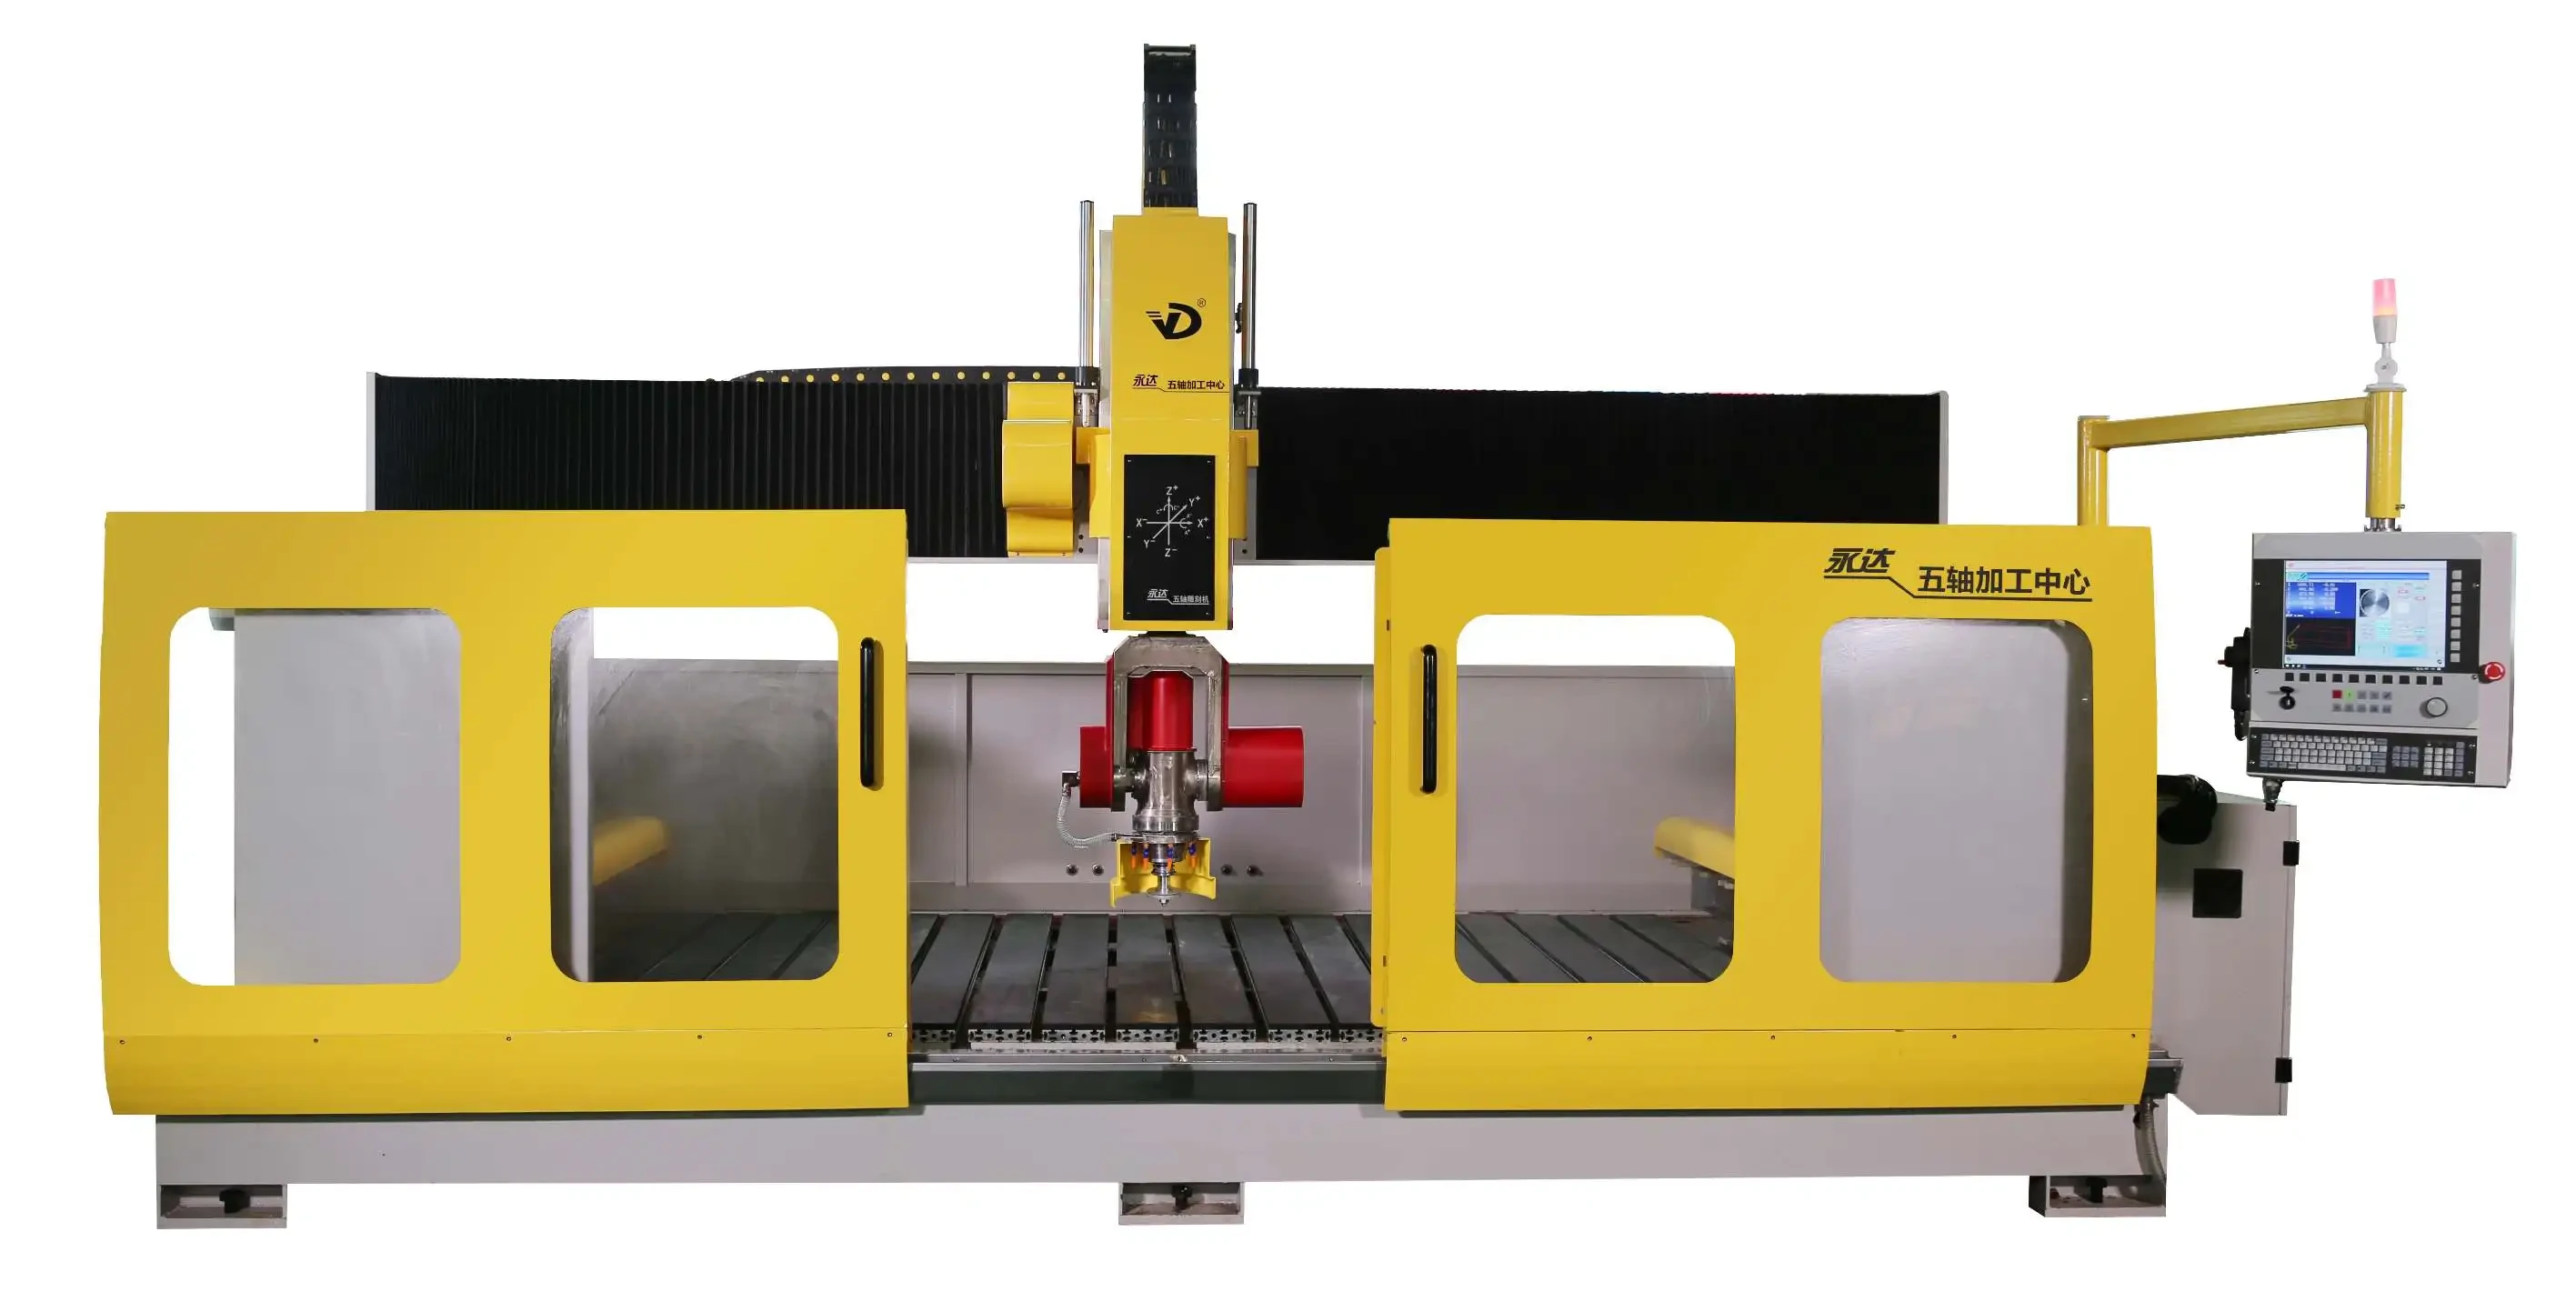 Key Features to Consider When Choosing a Stone CNC Machining Center